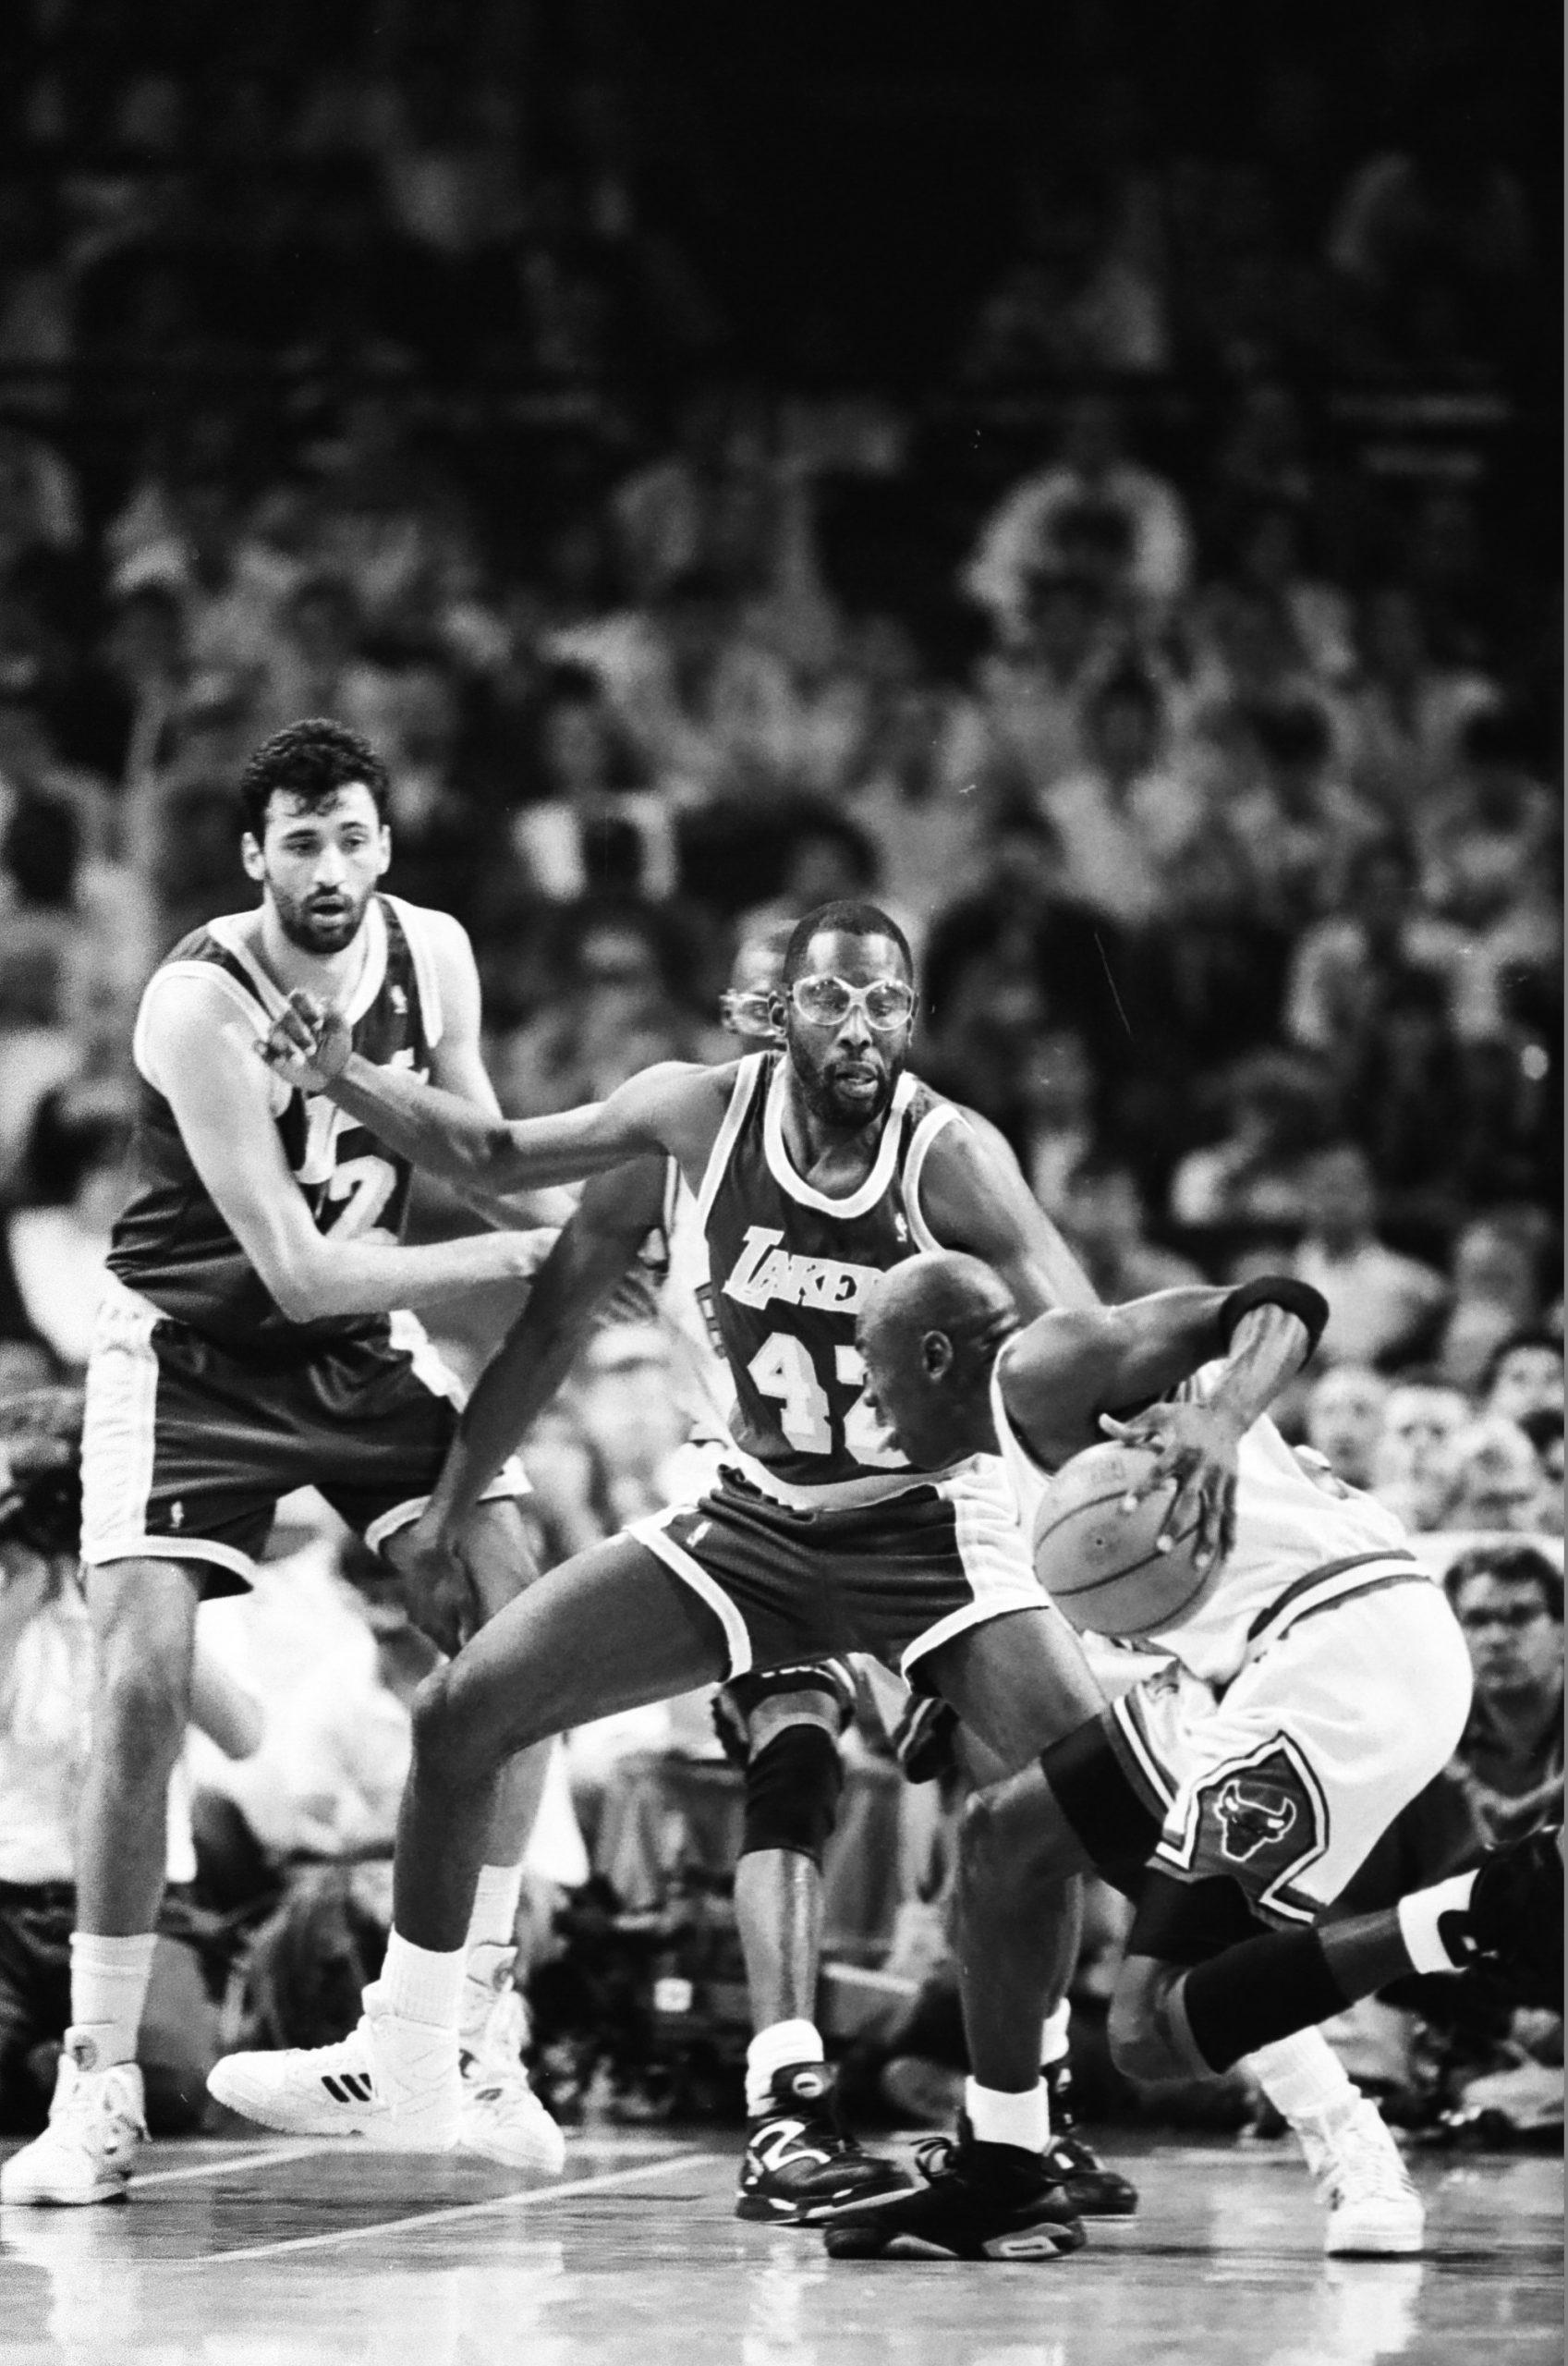 Michael Jordan with the ball being defended by James Worthy